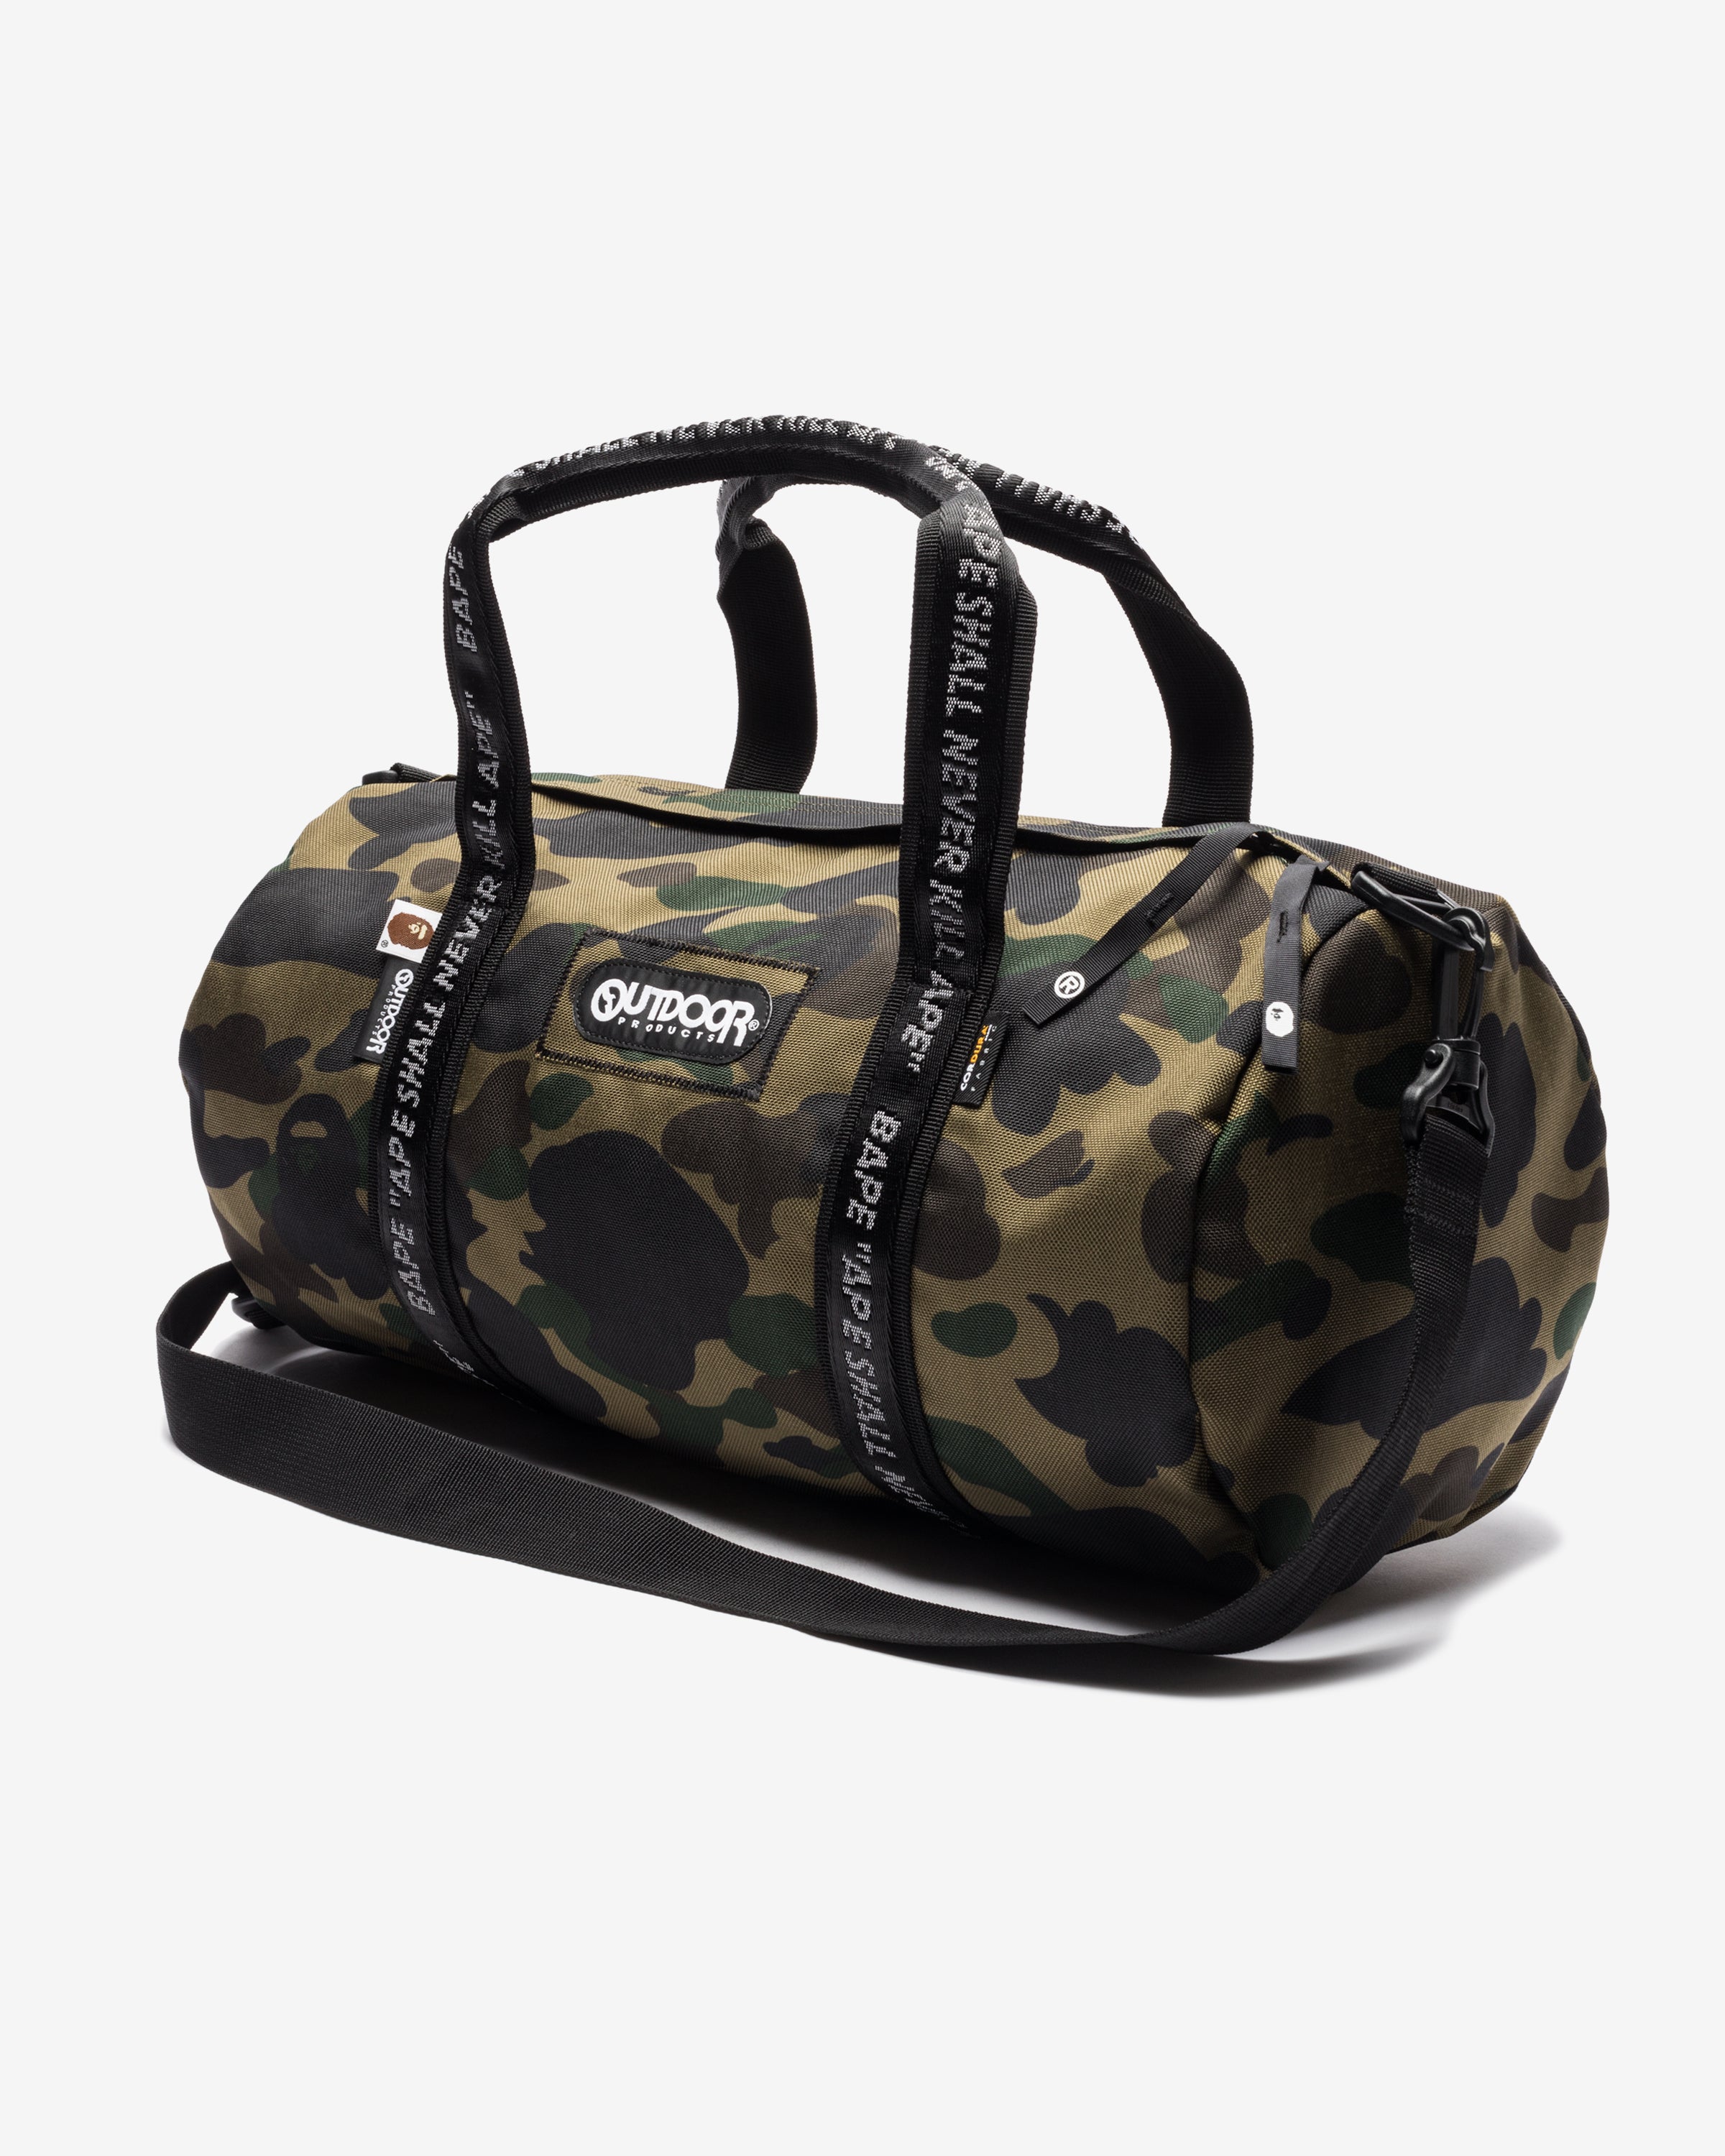 Bape Duffel for Sale in Lake Grove, OR - OfferUp